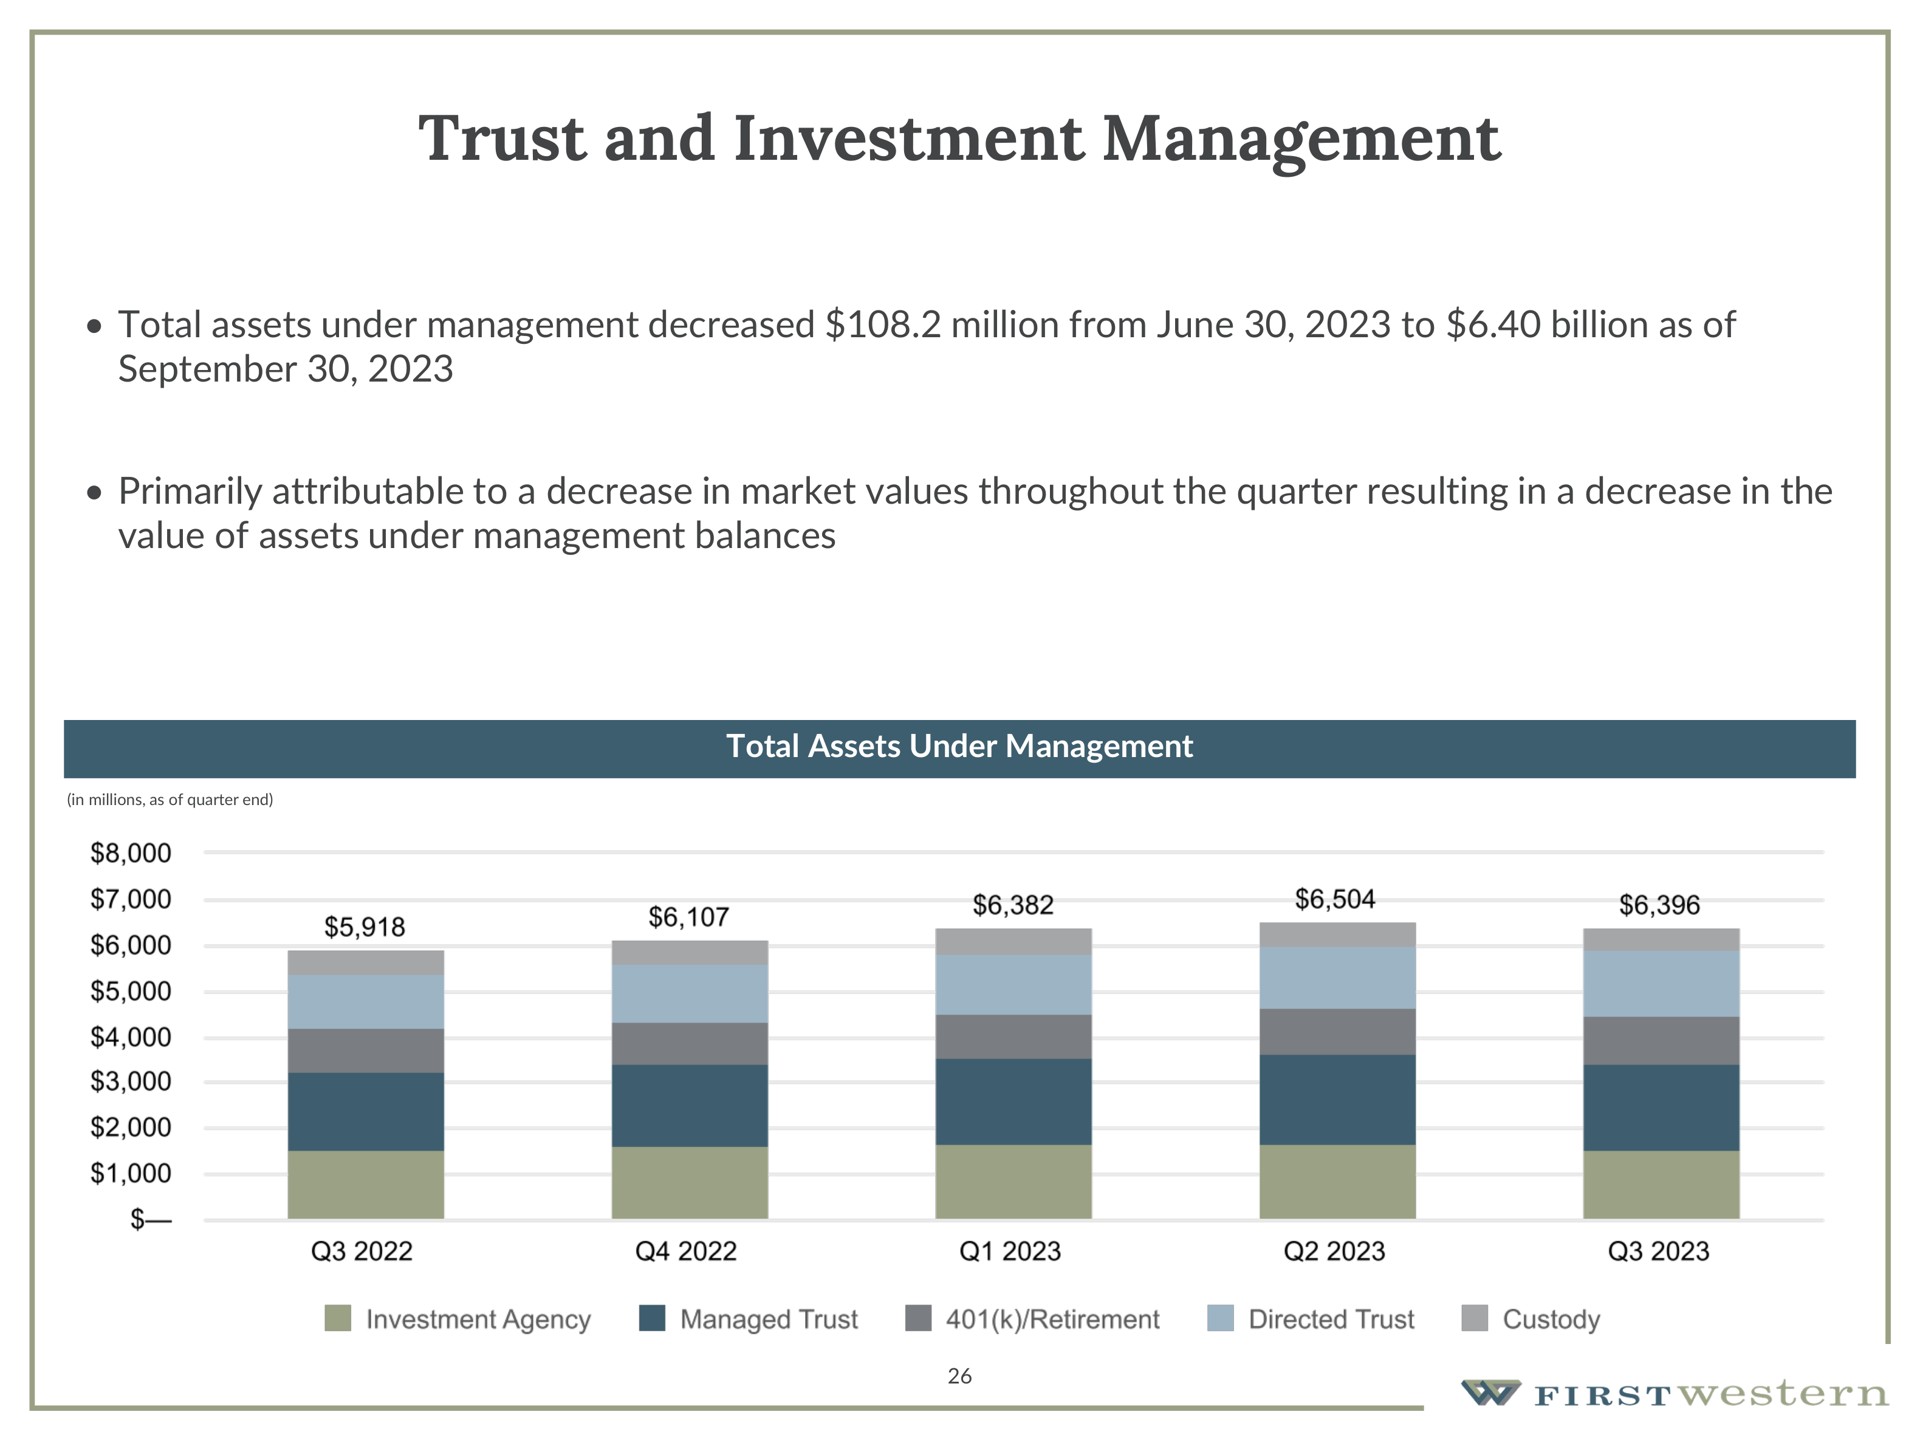 trust and investment management | First Western Financial